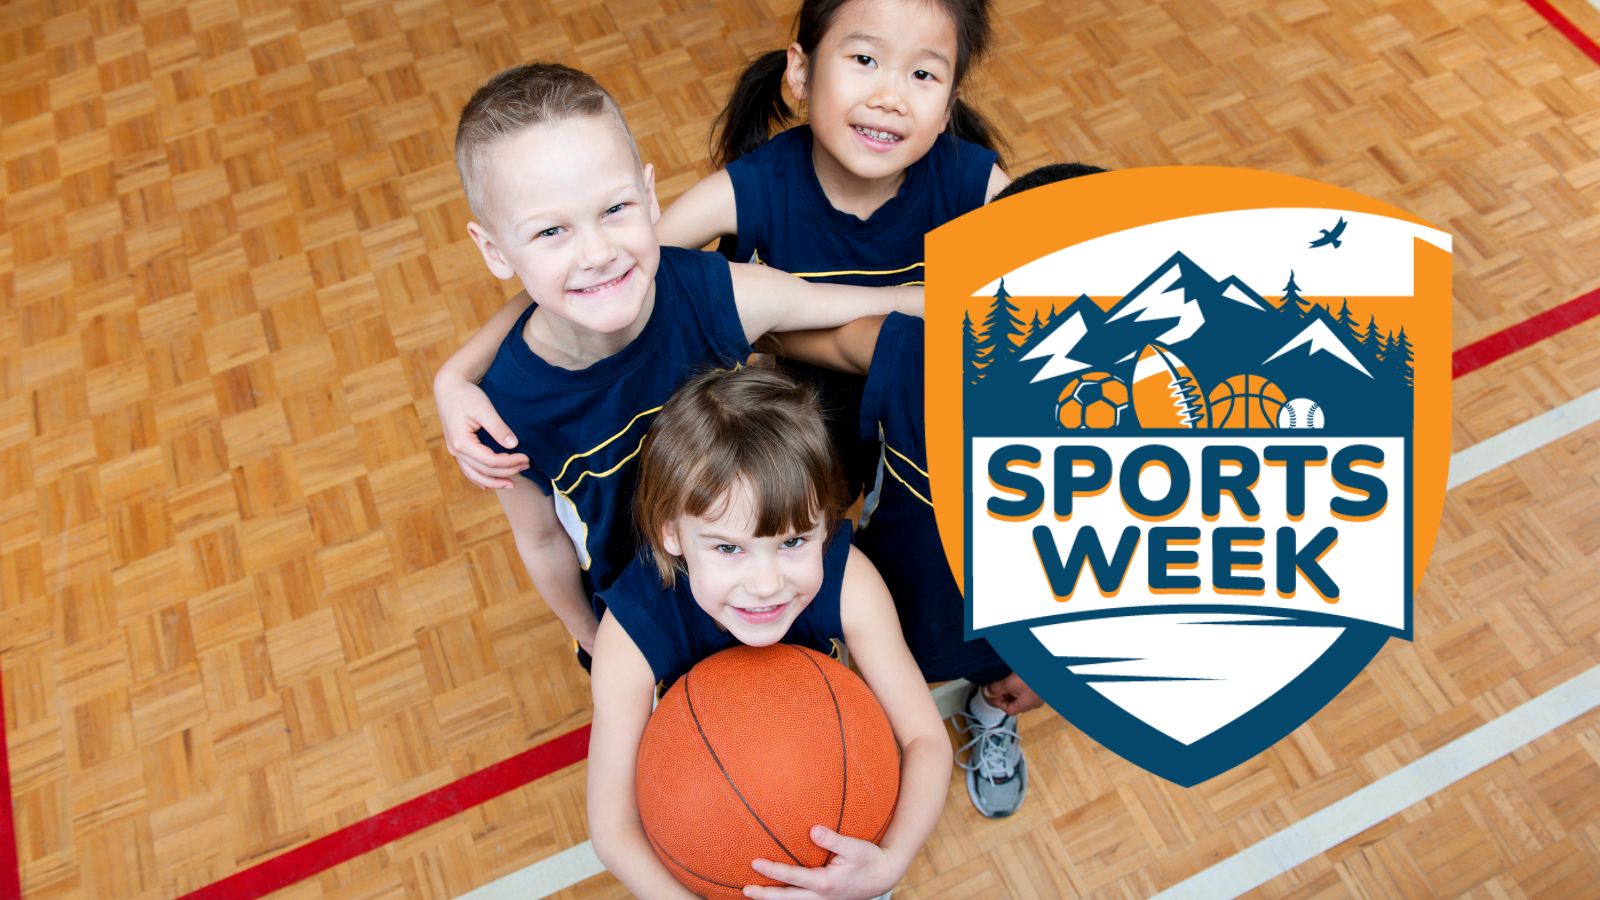 SportsWeek Summer Camps, North Vancouver, British Columbia, Canada